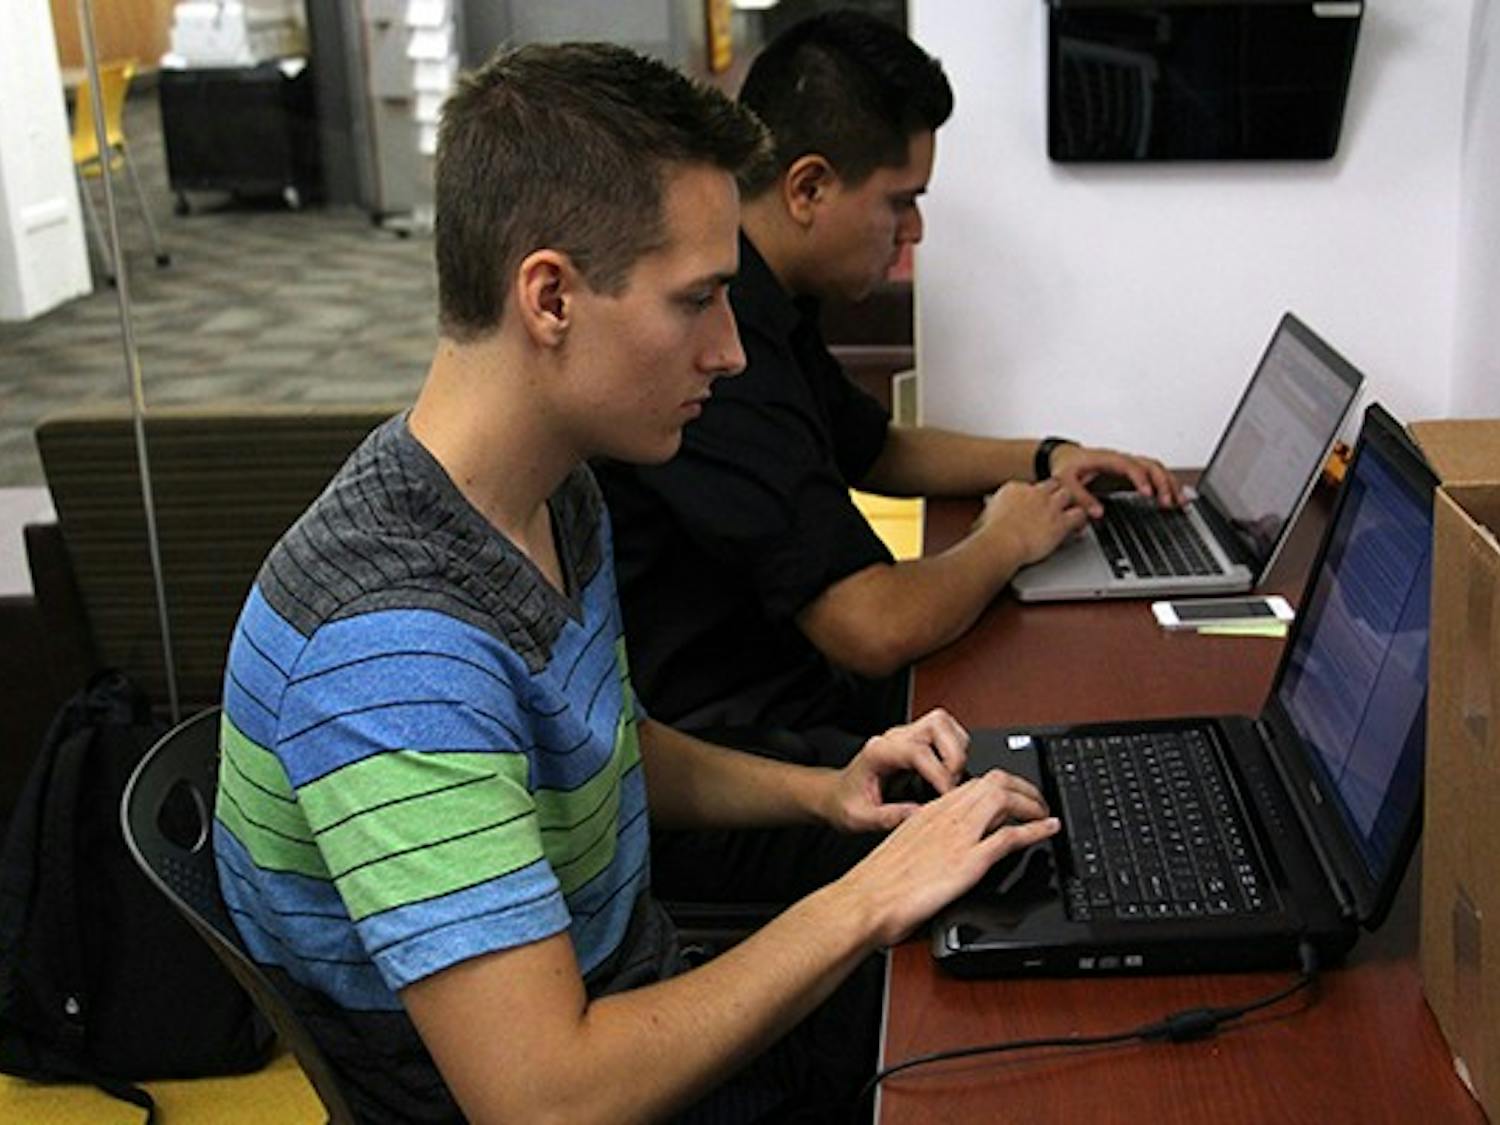 Public service and public policy freshman Thomas Prior and public service and public policy junior Eduardo Alonso work during their office hours as interns for the USGD in the Downtown campus's Post Office. (Photo by Tynin Fries) 